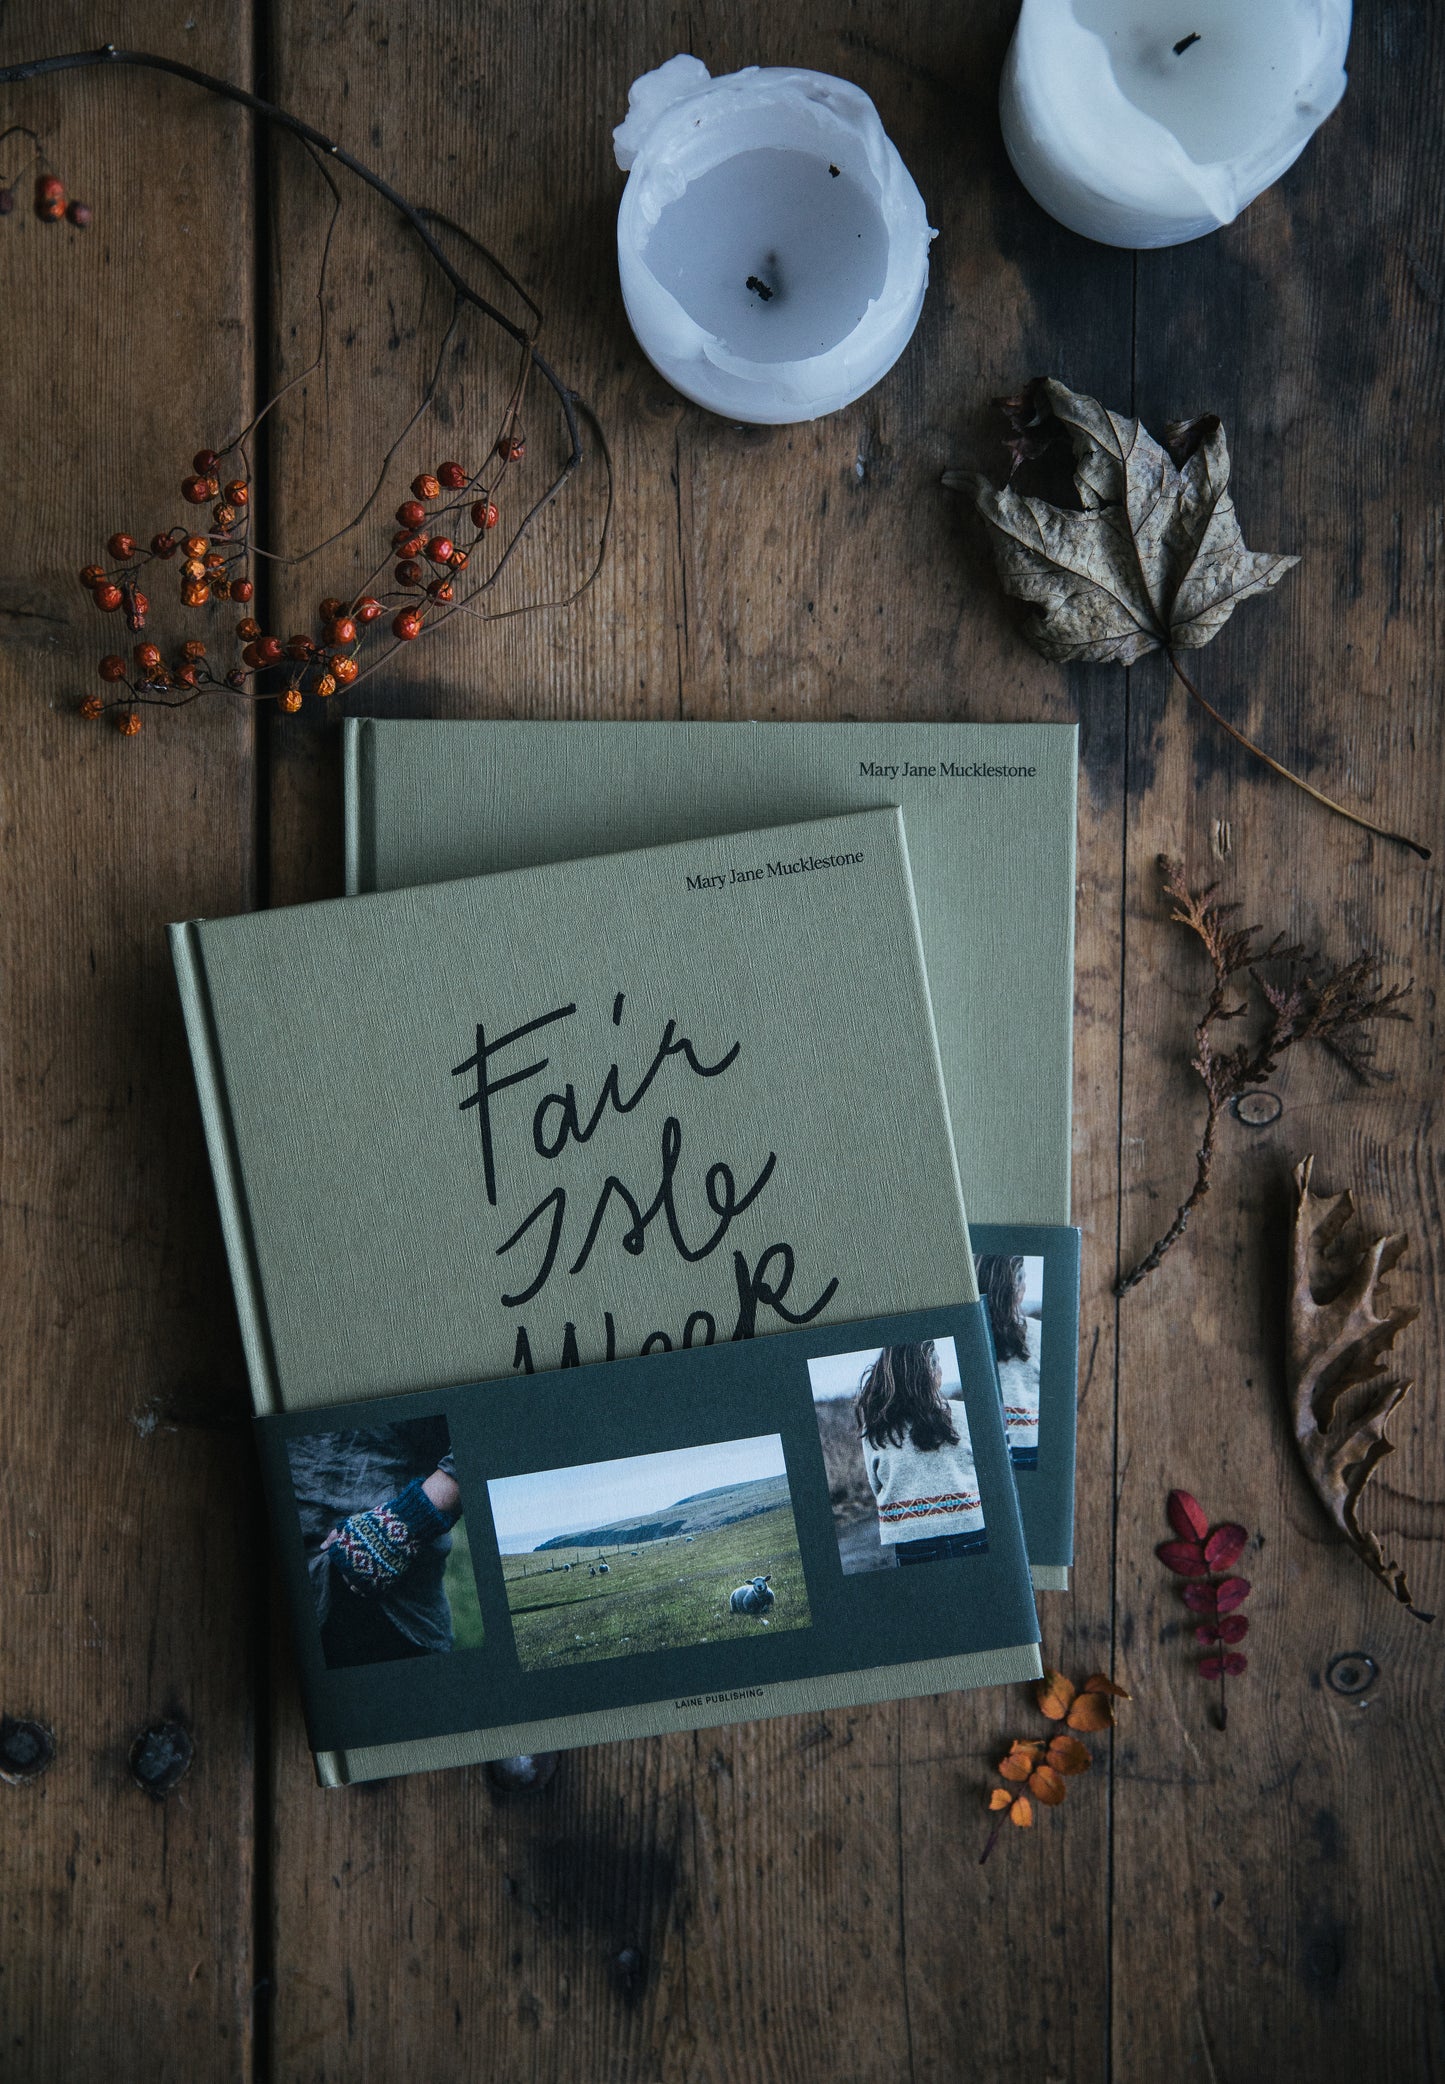 Fair Isle Weekend by Mary Jane Mucklestone - Autographed Copy